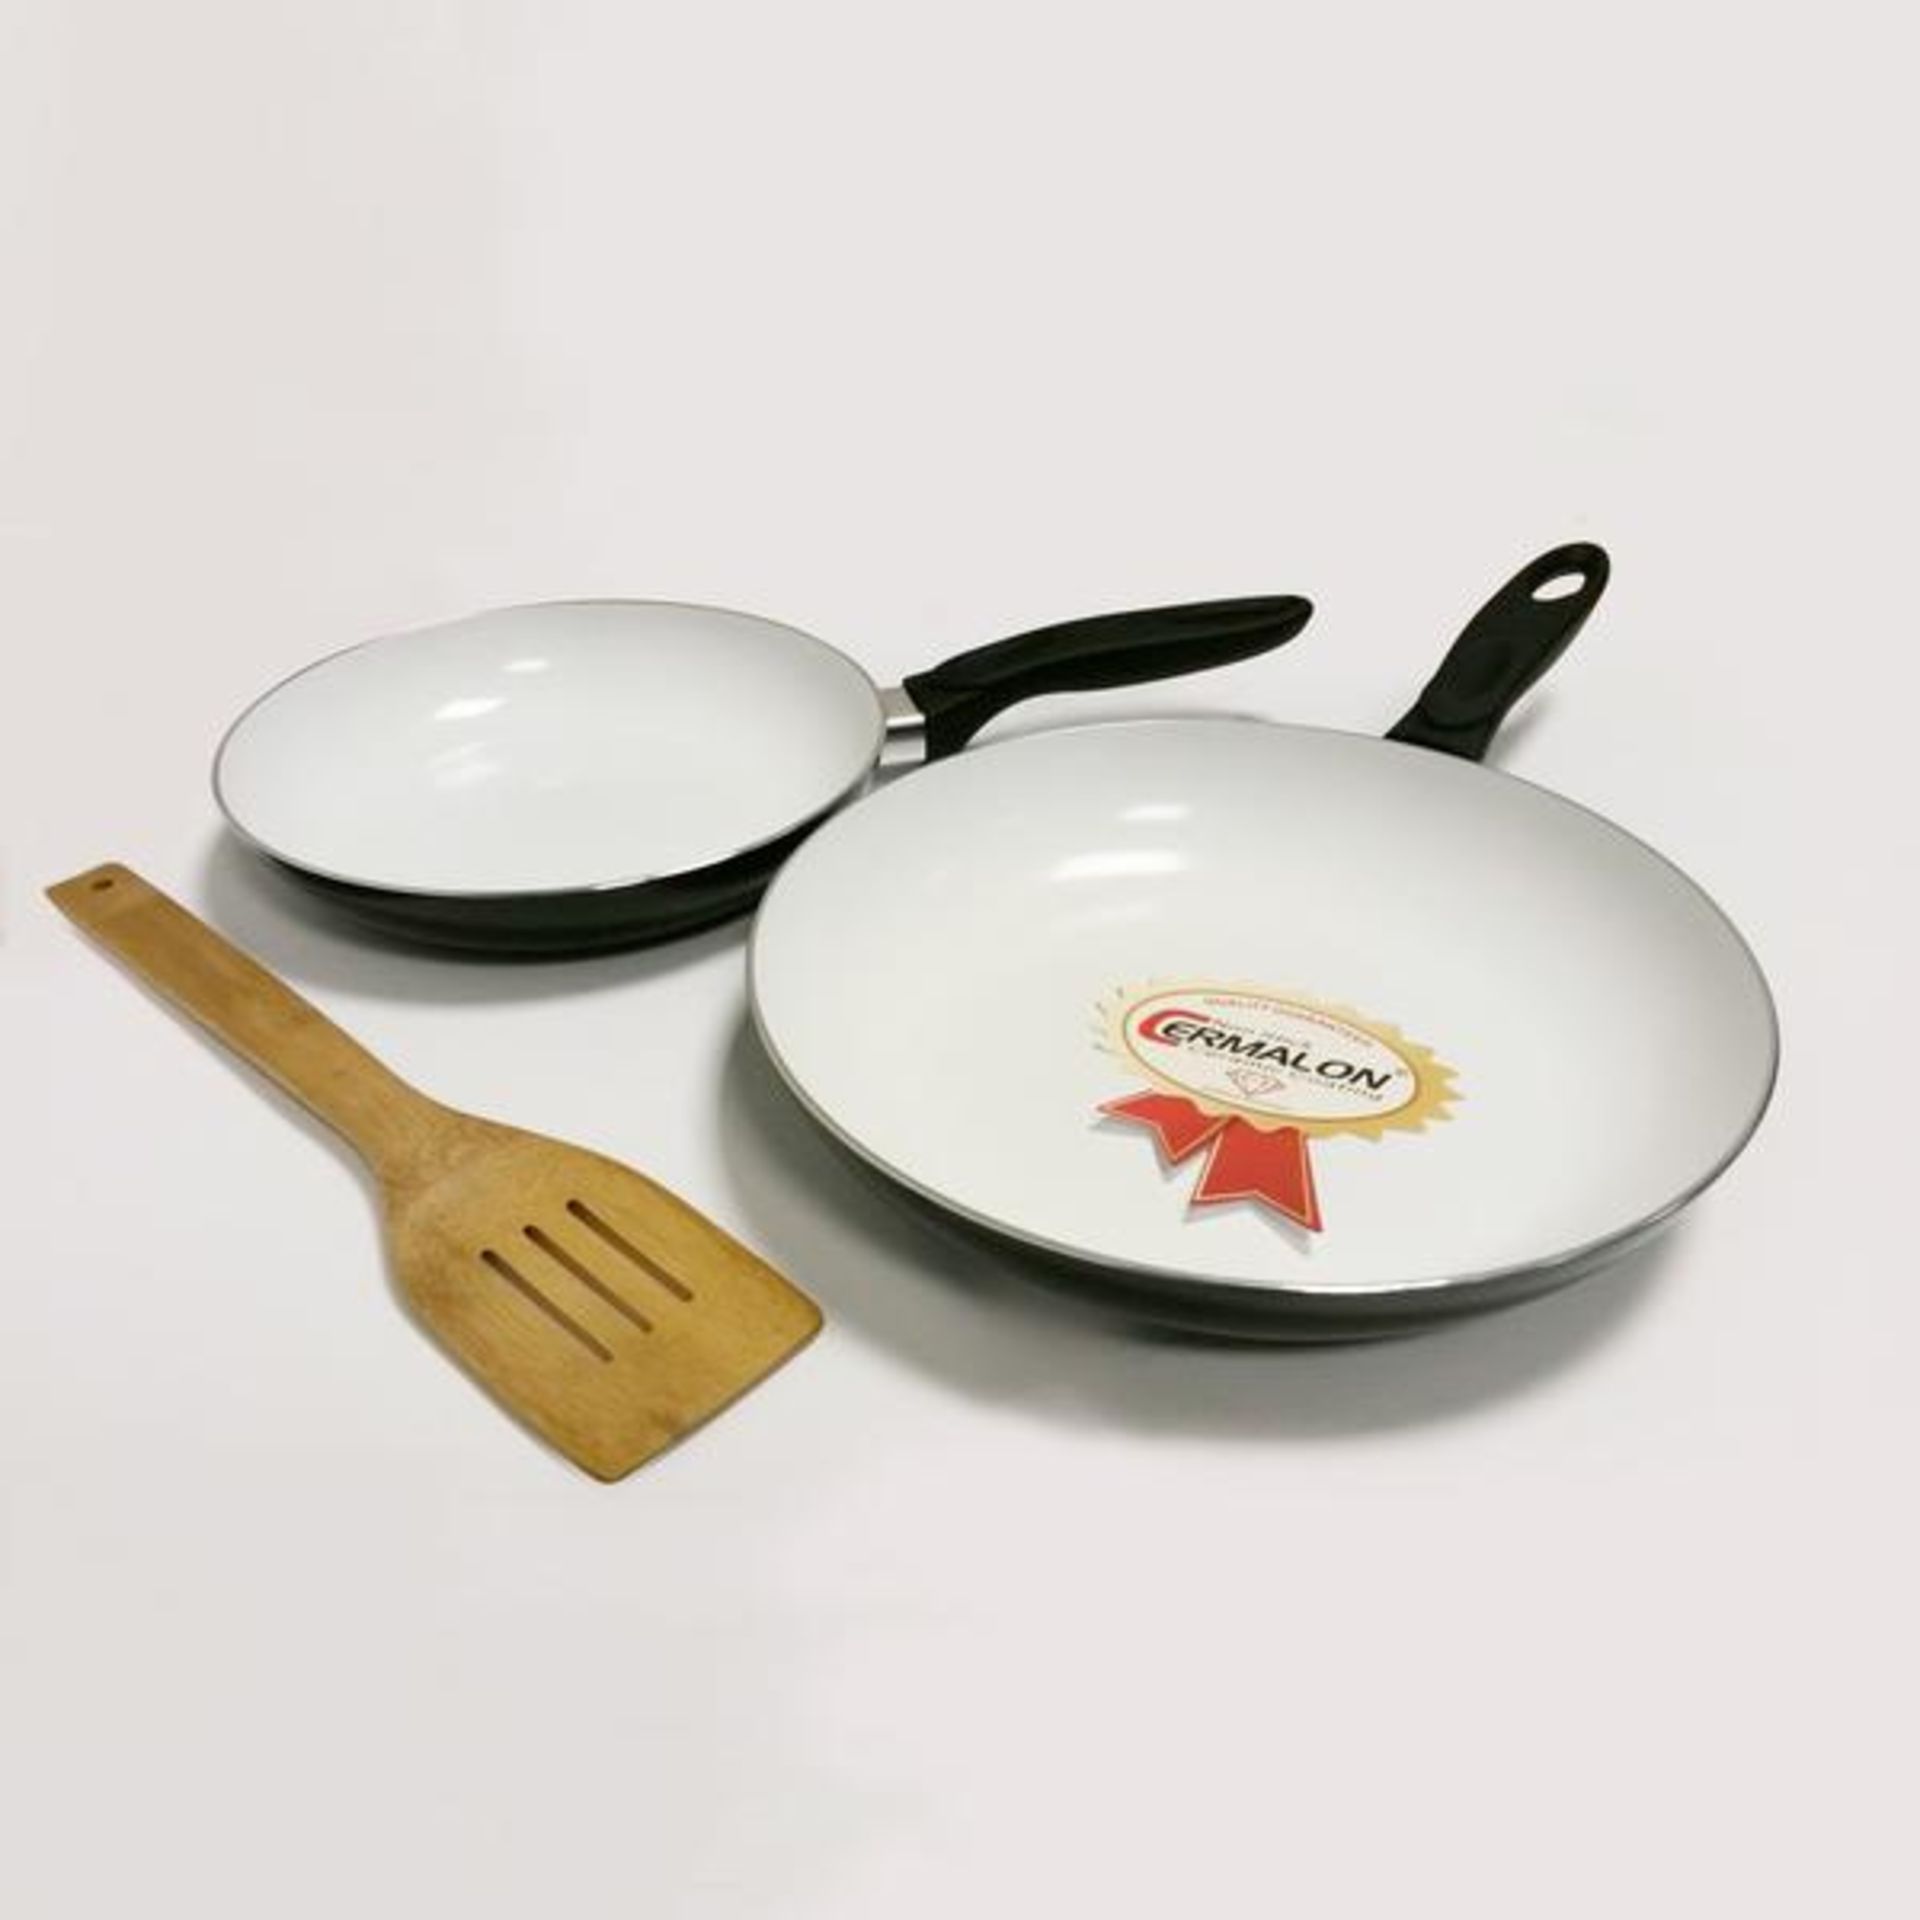 V Brand New Cermalon Non Stick Ceramic Coating 20 & 24cm Frying Pan Set In Red With Spatula X 2 YOUR